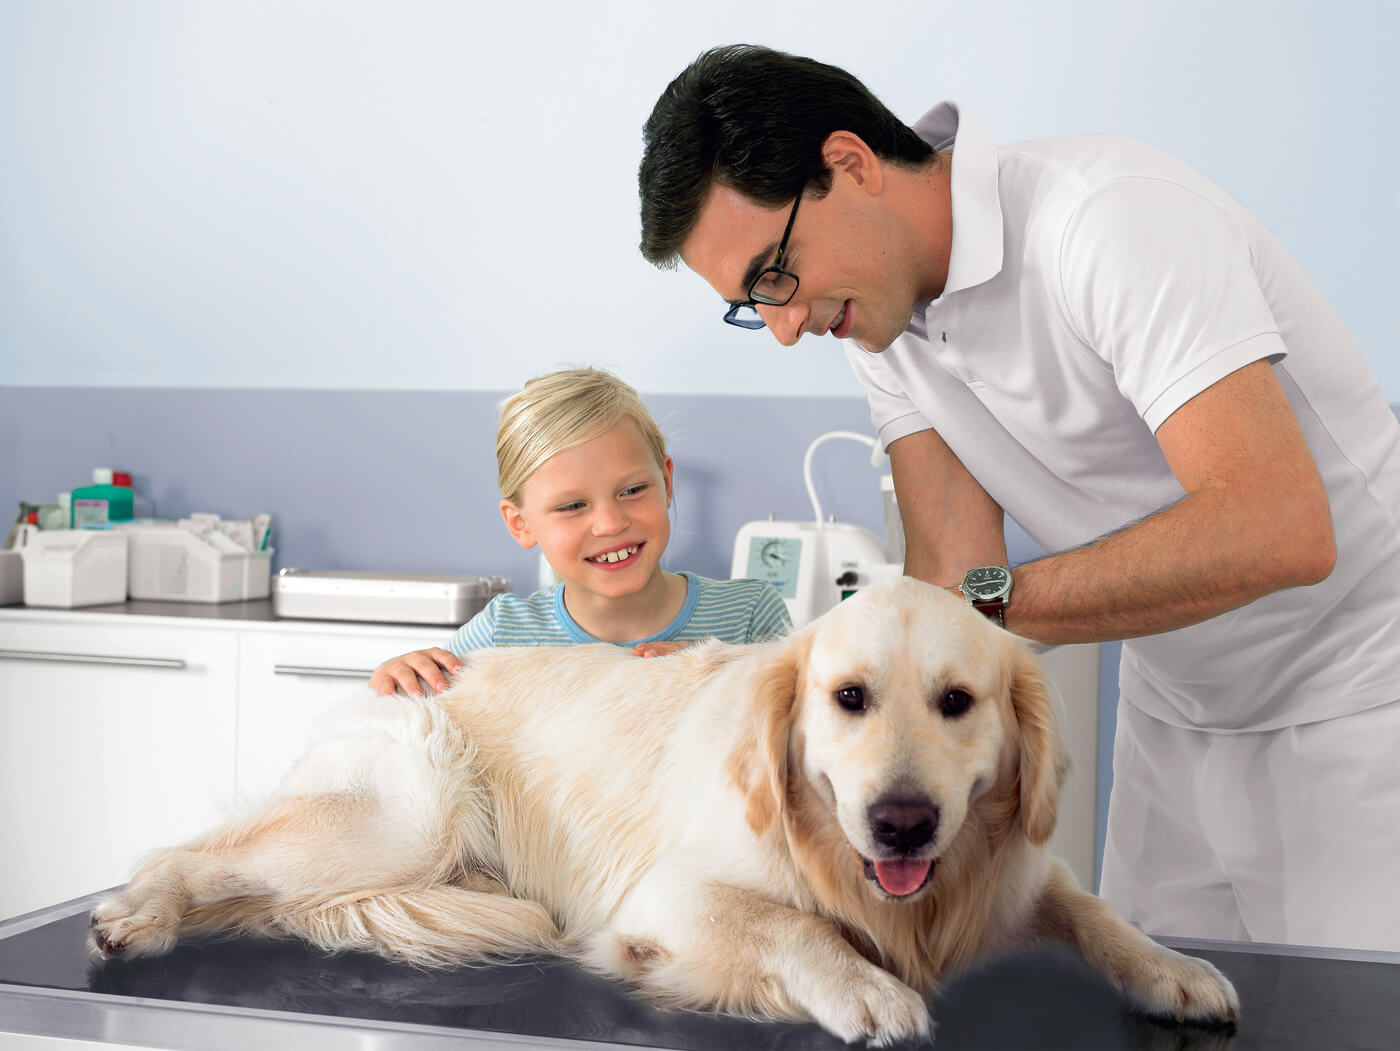 Veterinary Laundry Equipment available from Multibrand Professional